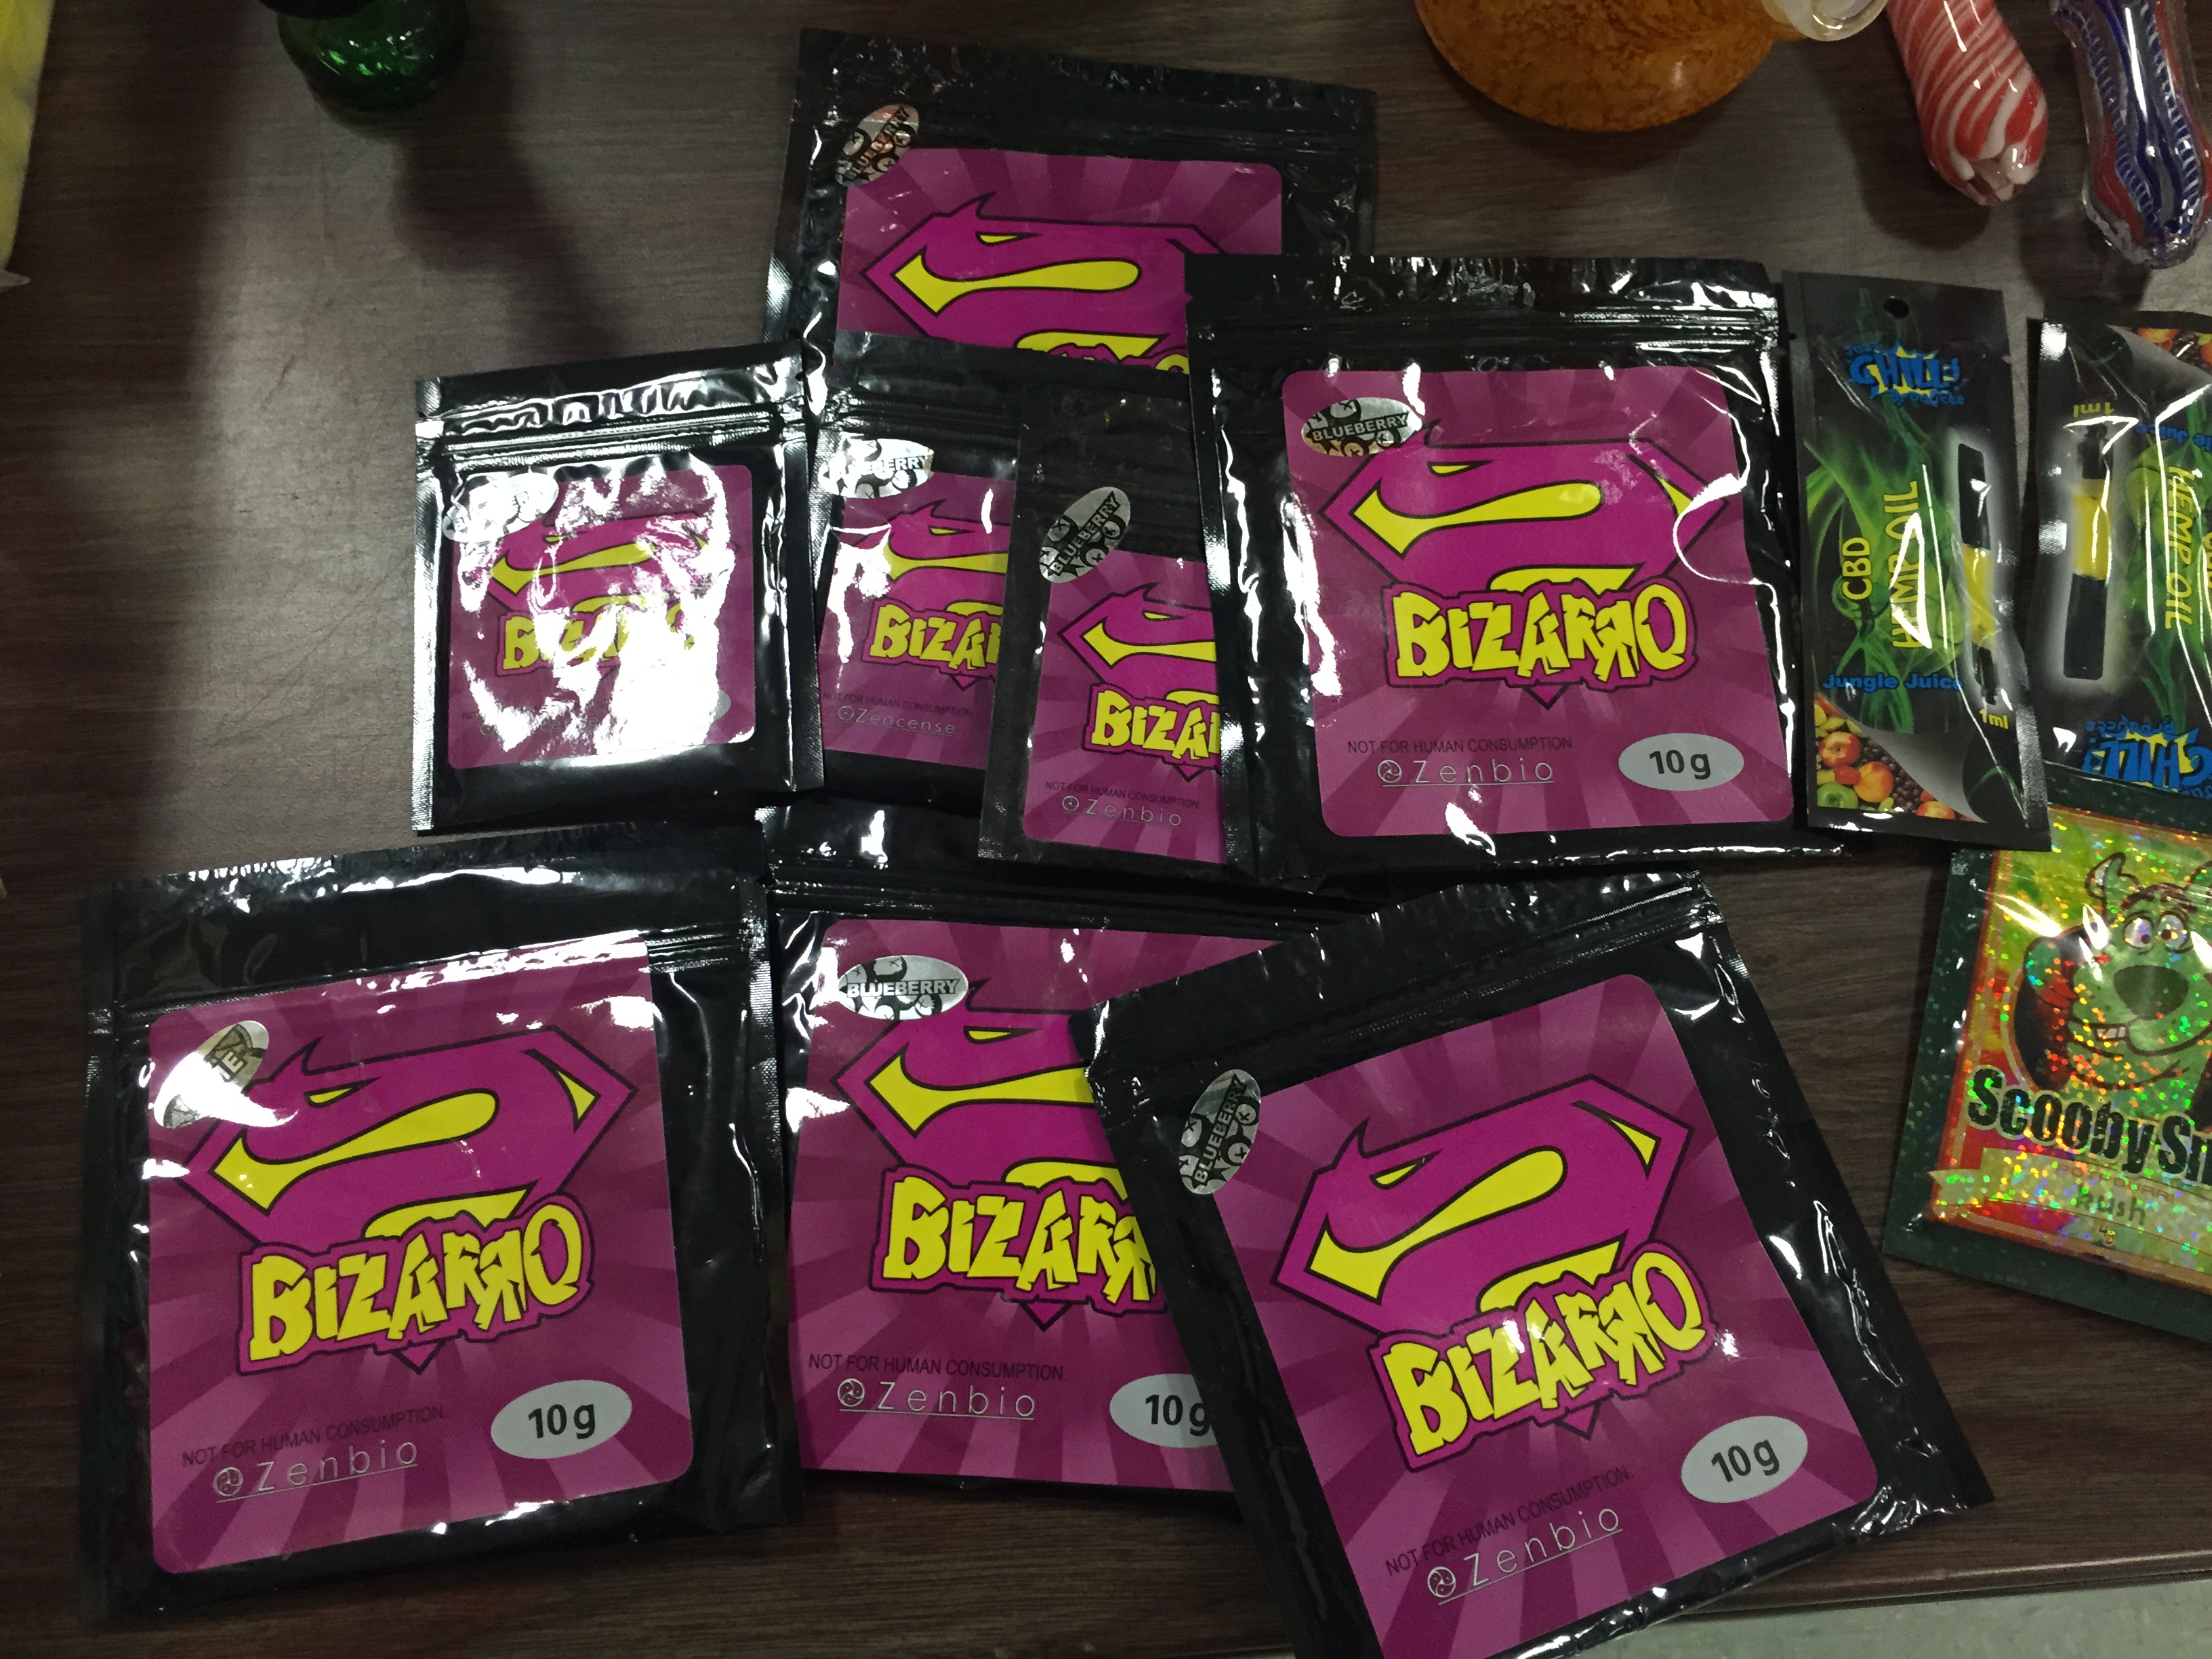 Prince George’s Co. police seize $33K worth of synthetic drugs